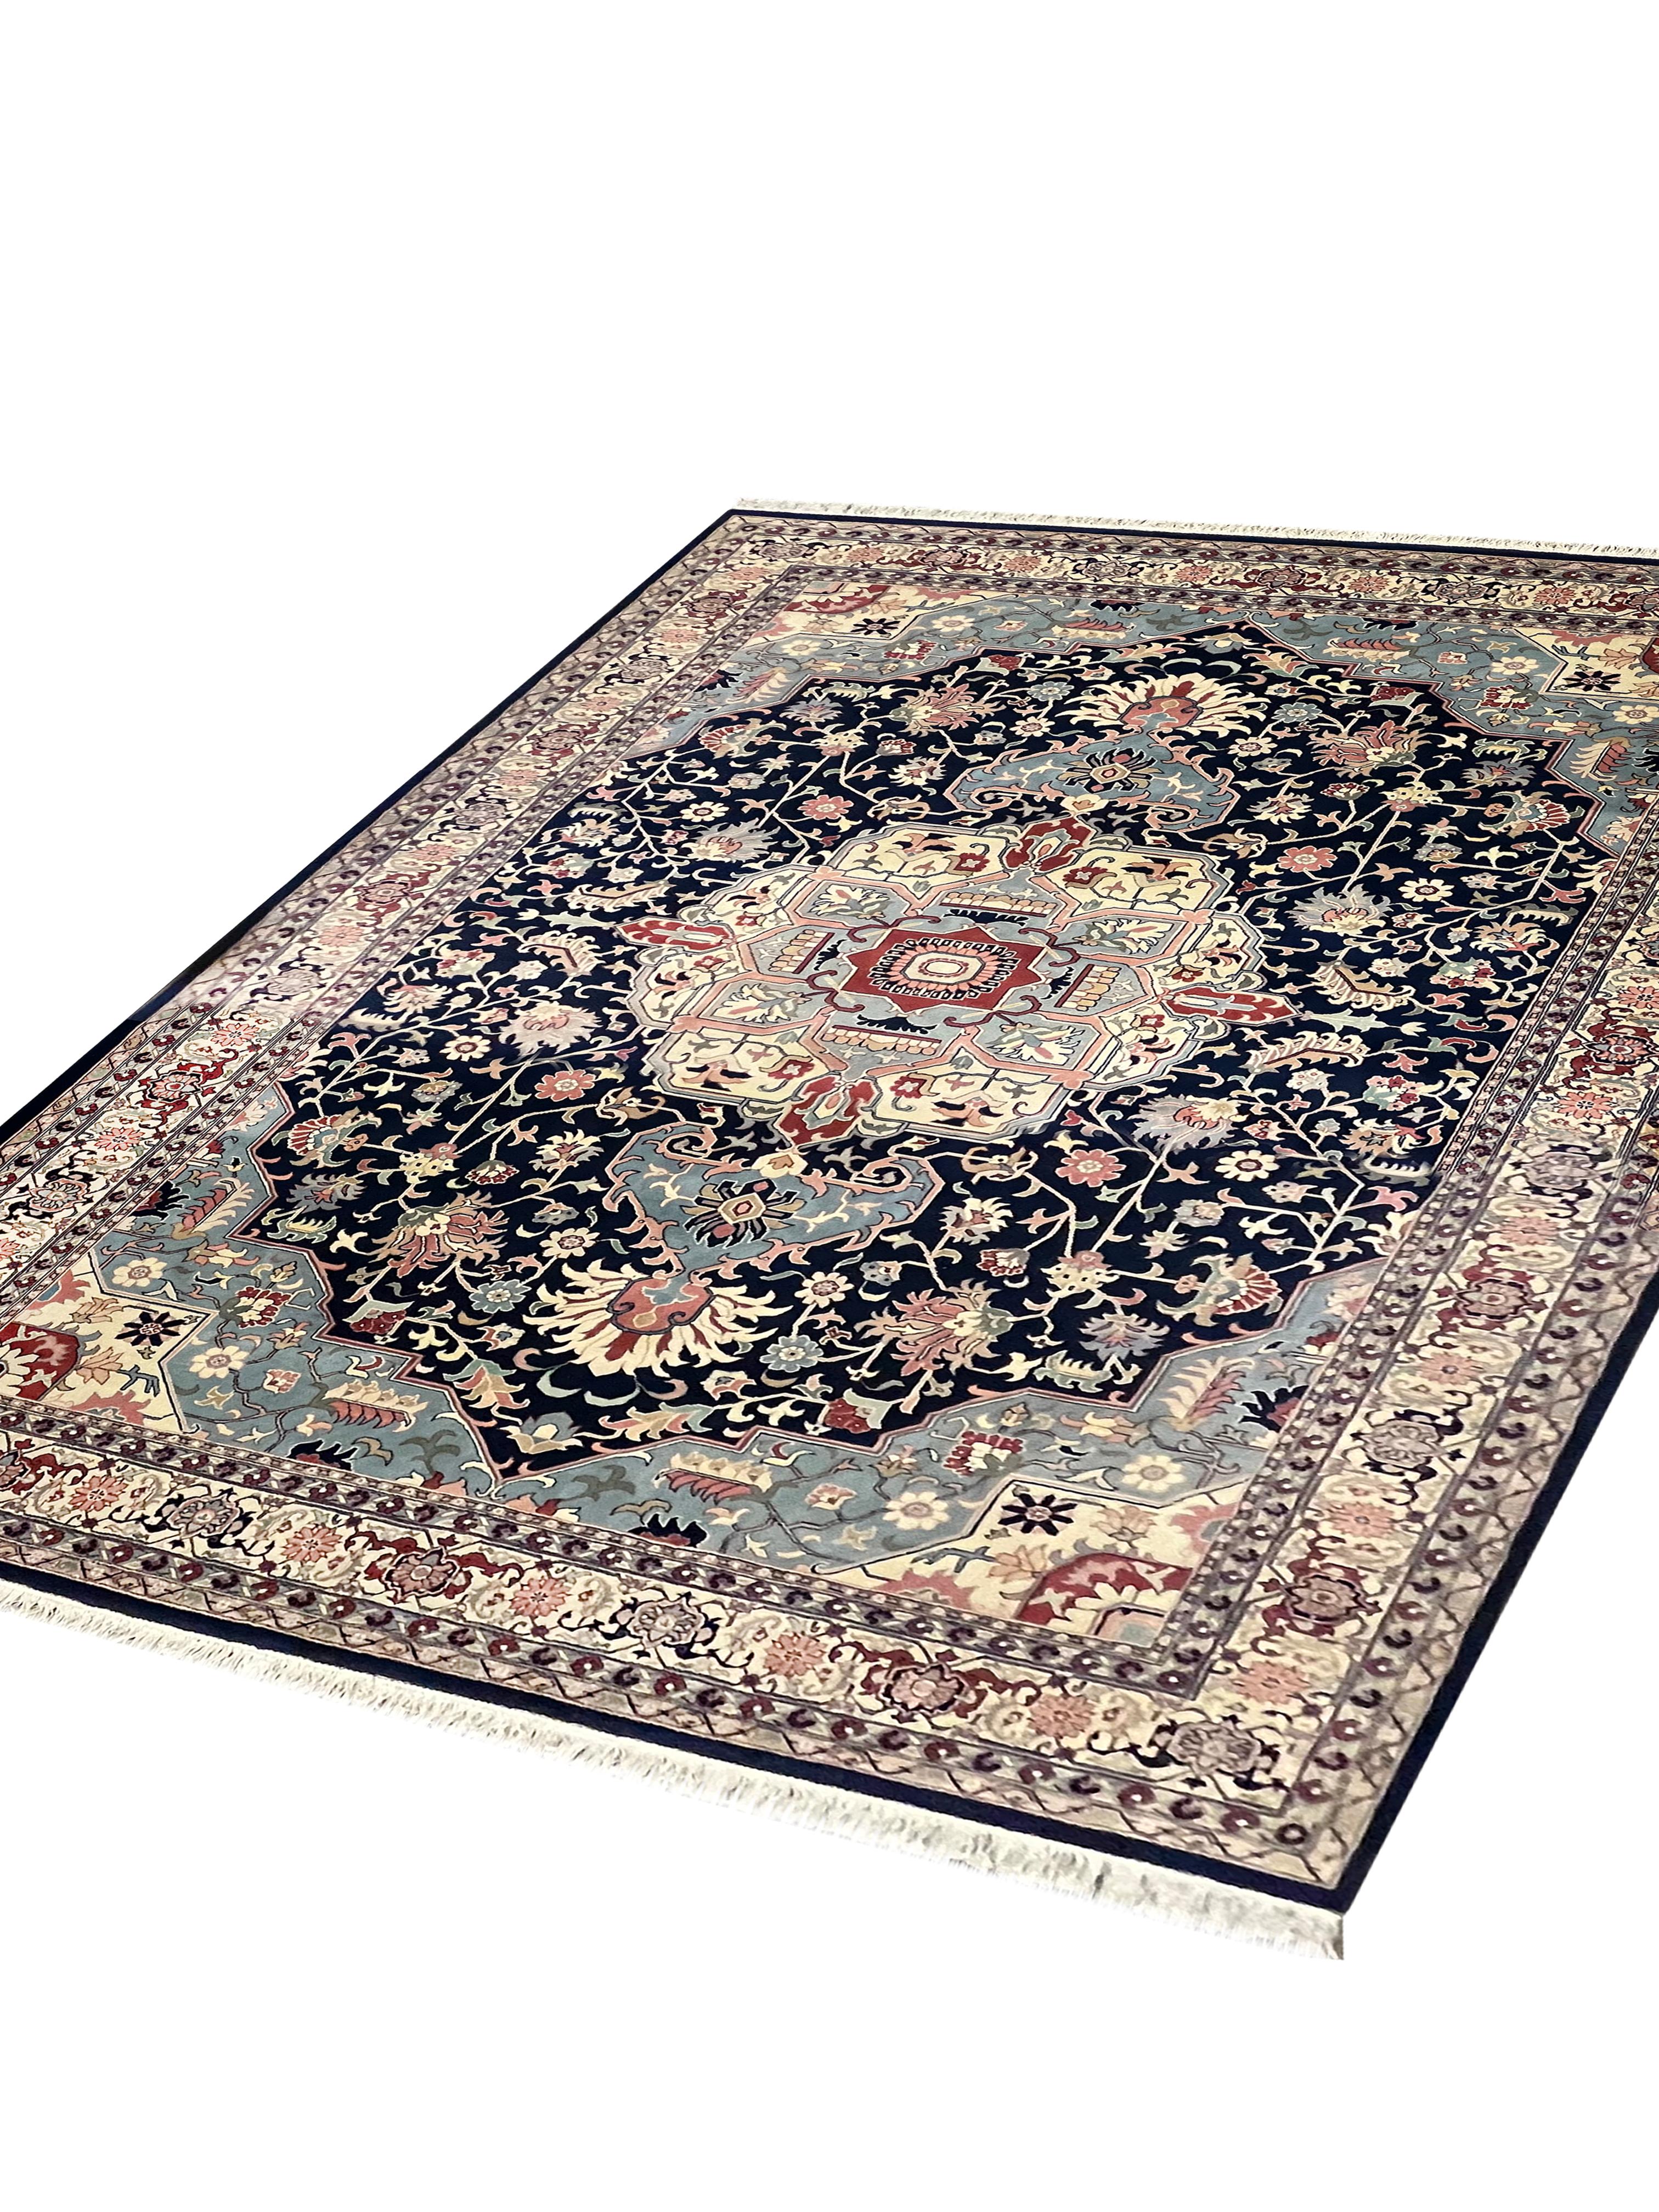 This bold wool area rug is a great example of a modern wool oriental rug. The design features a traditional Geometric design with a large central medallion woven in accents of beige, pink, red and blue that have been woven on a deep blue background.